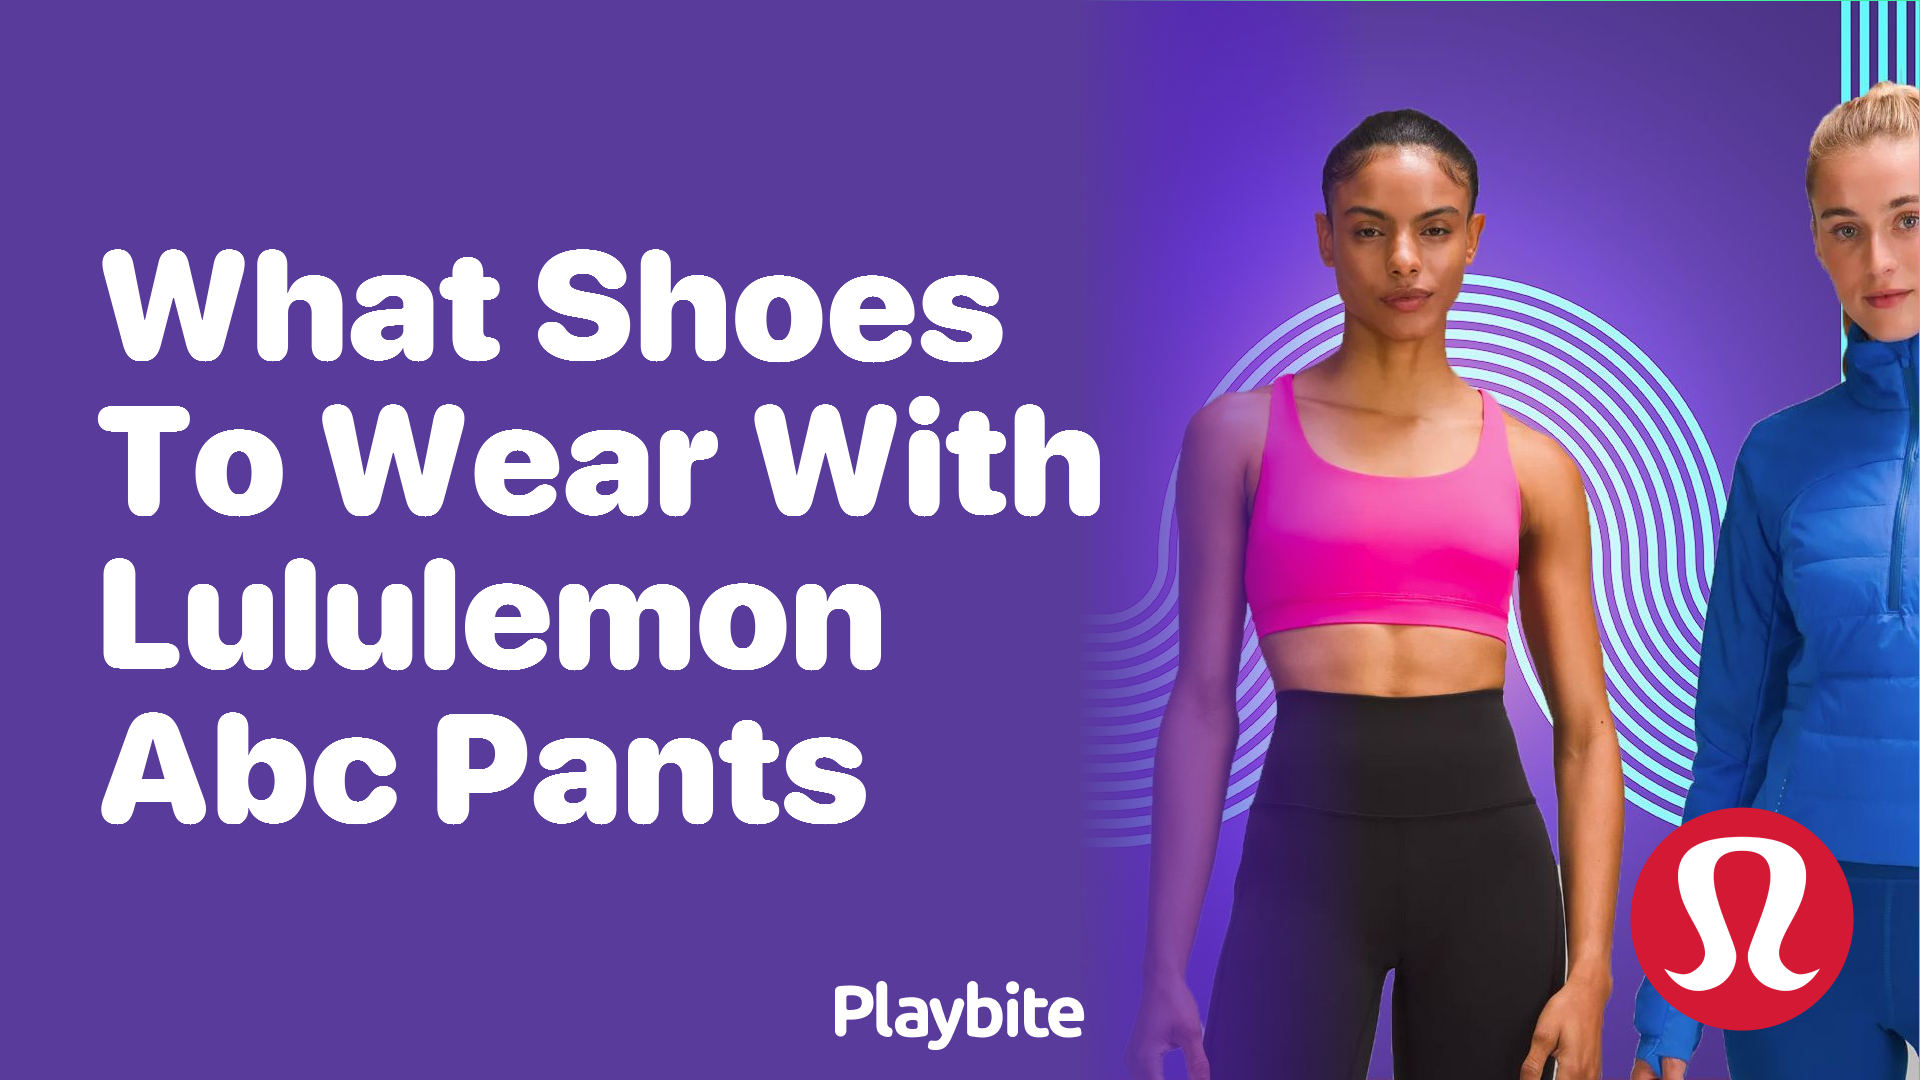 What Shoes Pair Best with Lululemon ABC Pants? - Playbite